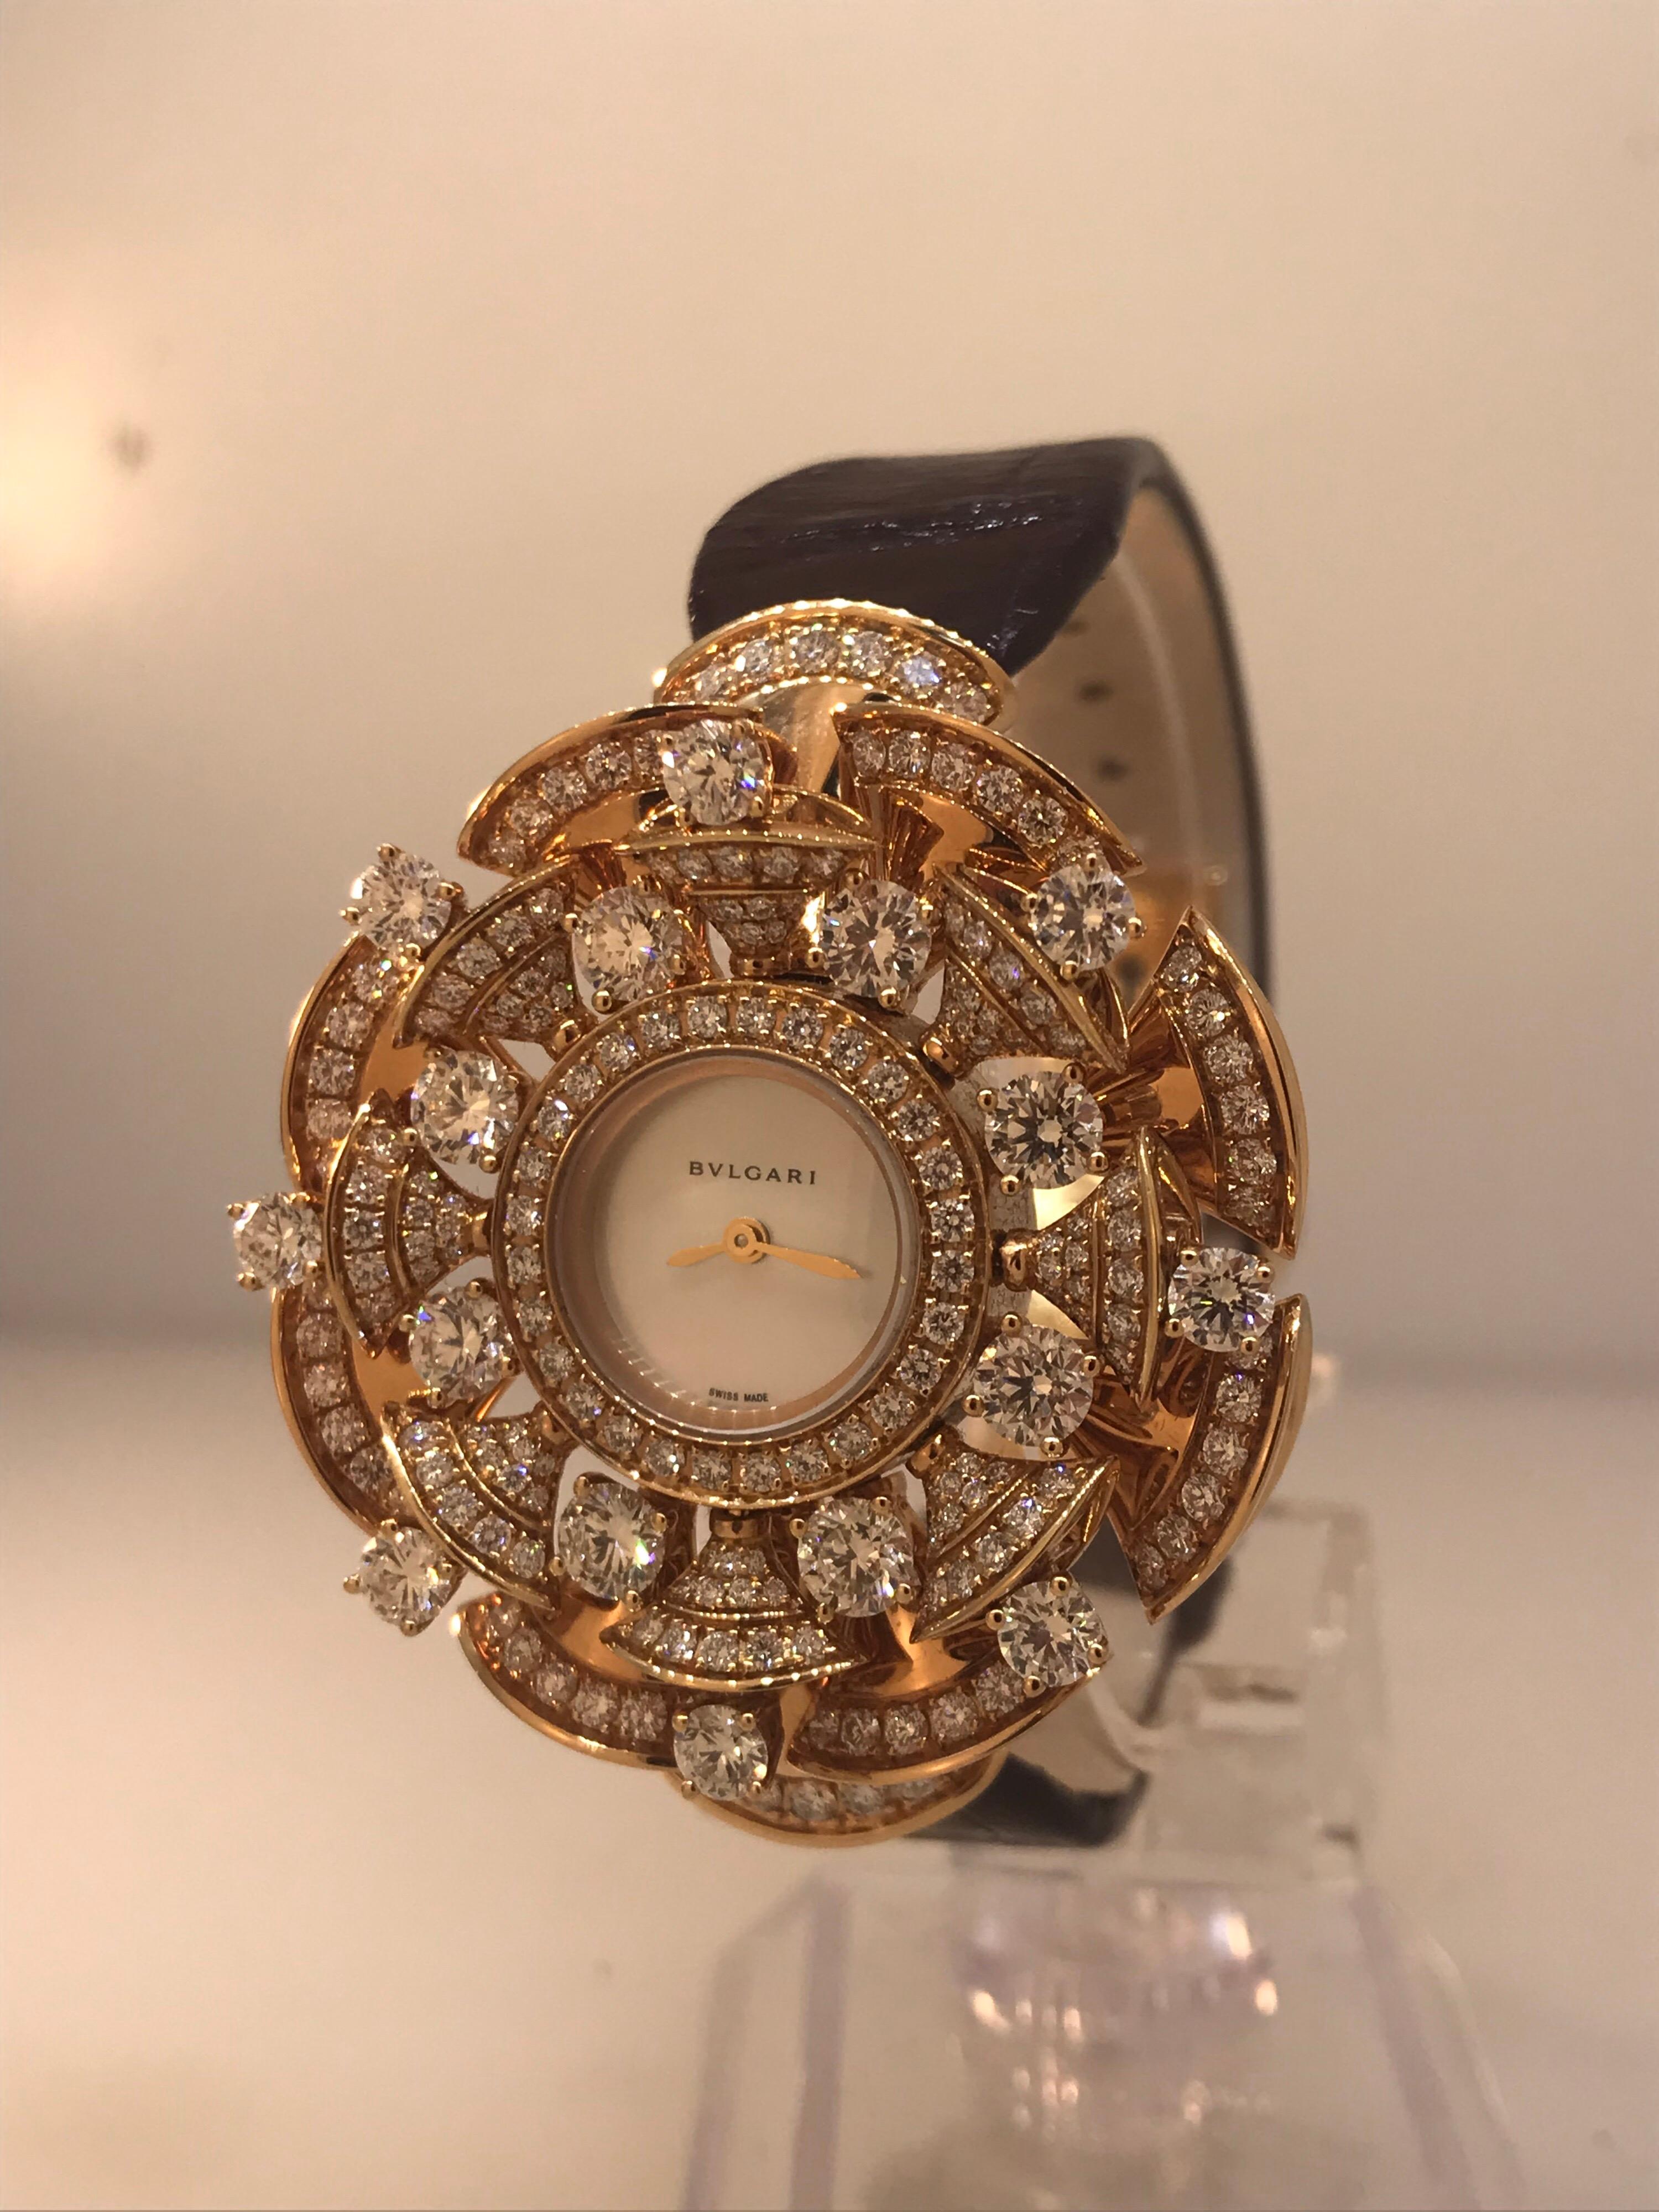 Bulgari Diva's Dream Rose Gold Pave Diamond Leather Band Ladies Watch 102546 In New Condition For Sale In New York, NY